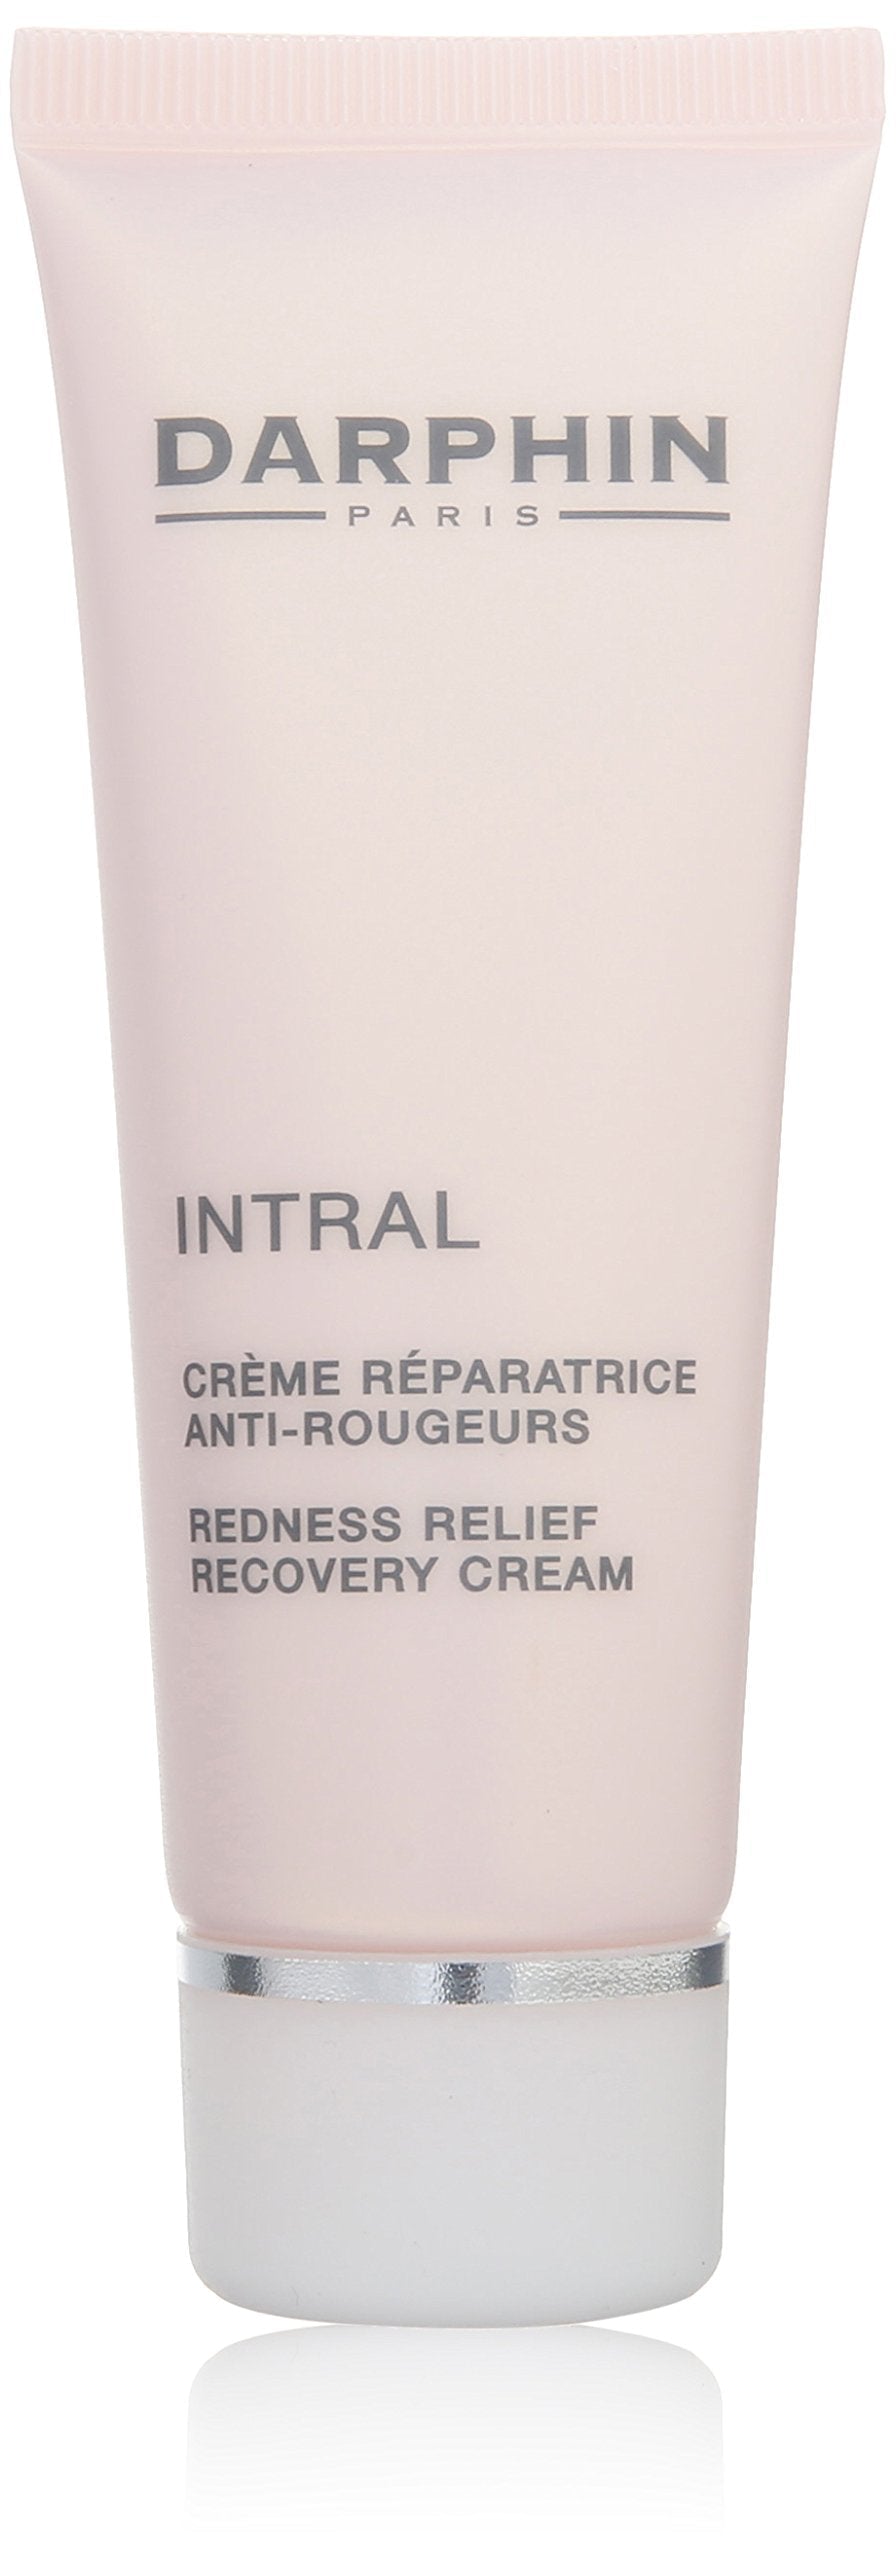 [Australia] - DARPHIN Intral Redness Relief Recovery Cream For Normal To Combination Skin by Darphin for Unisex - 1.7 oz C 